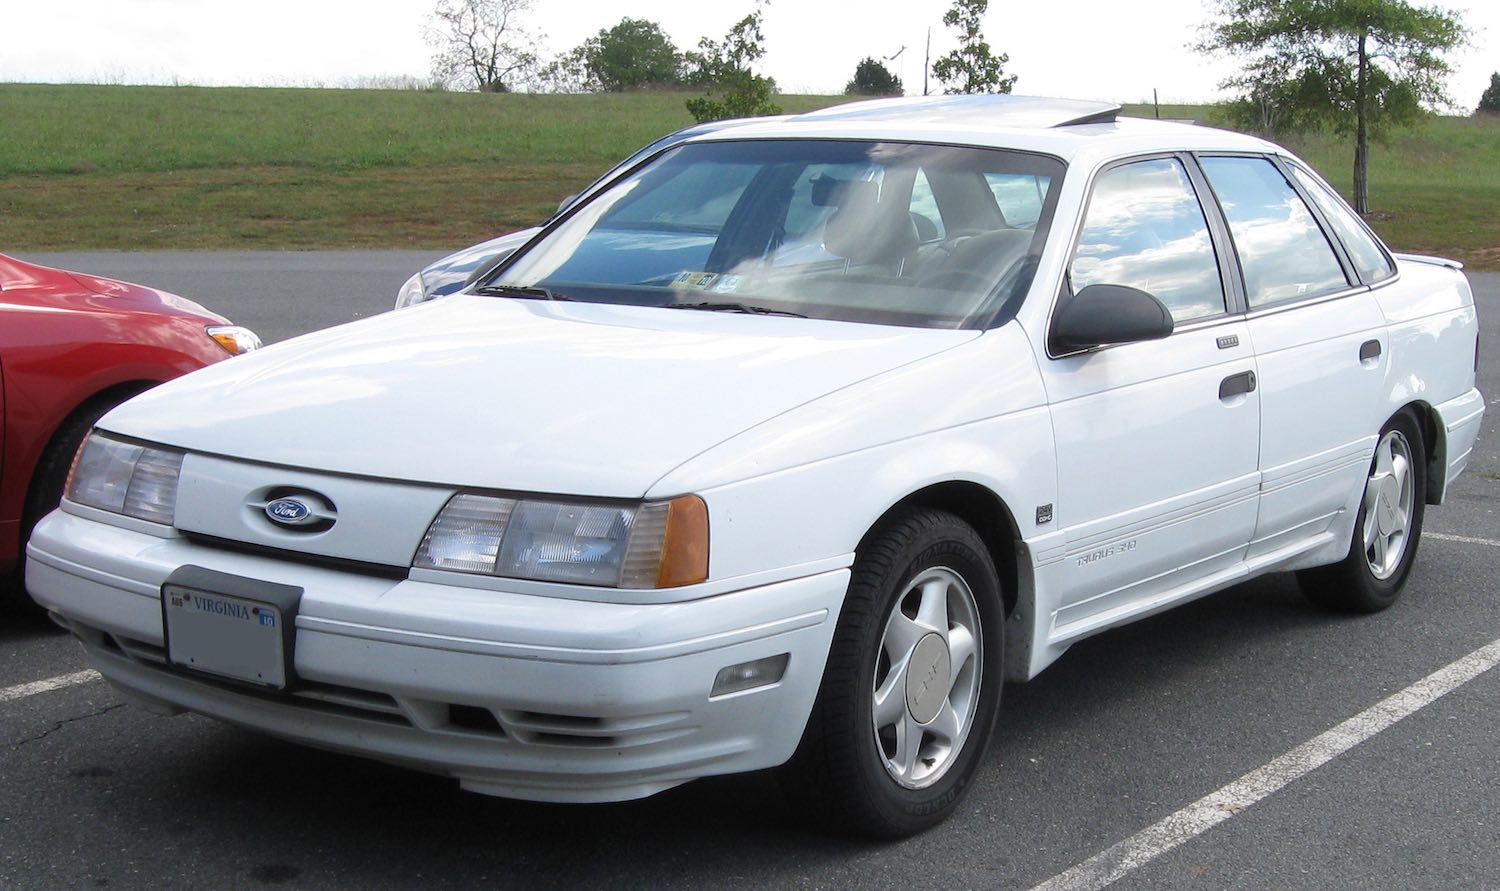 White Ford Taurus sedan SHO edition by SVT in a parking lot.